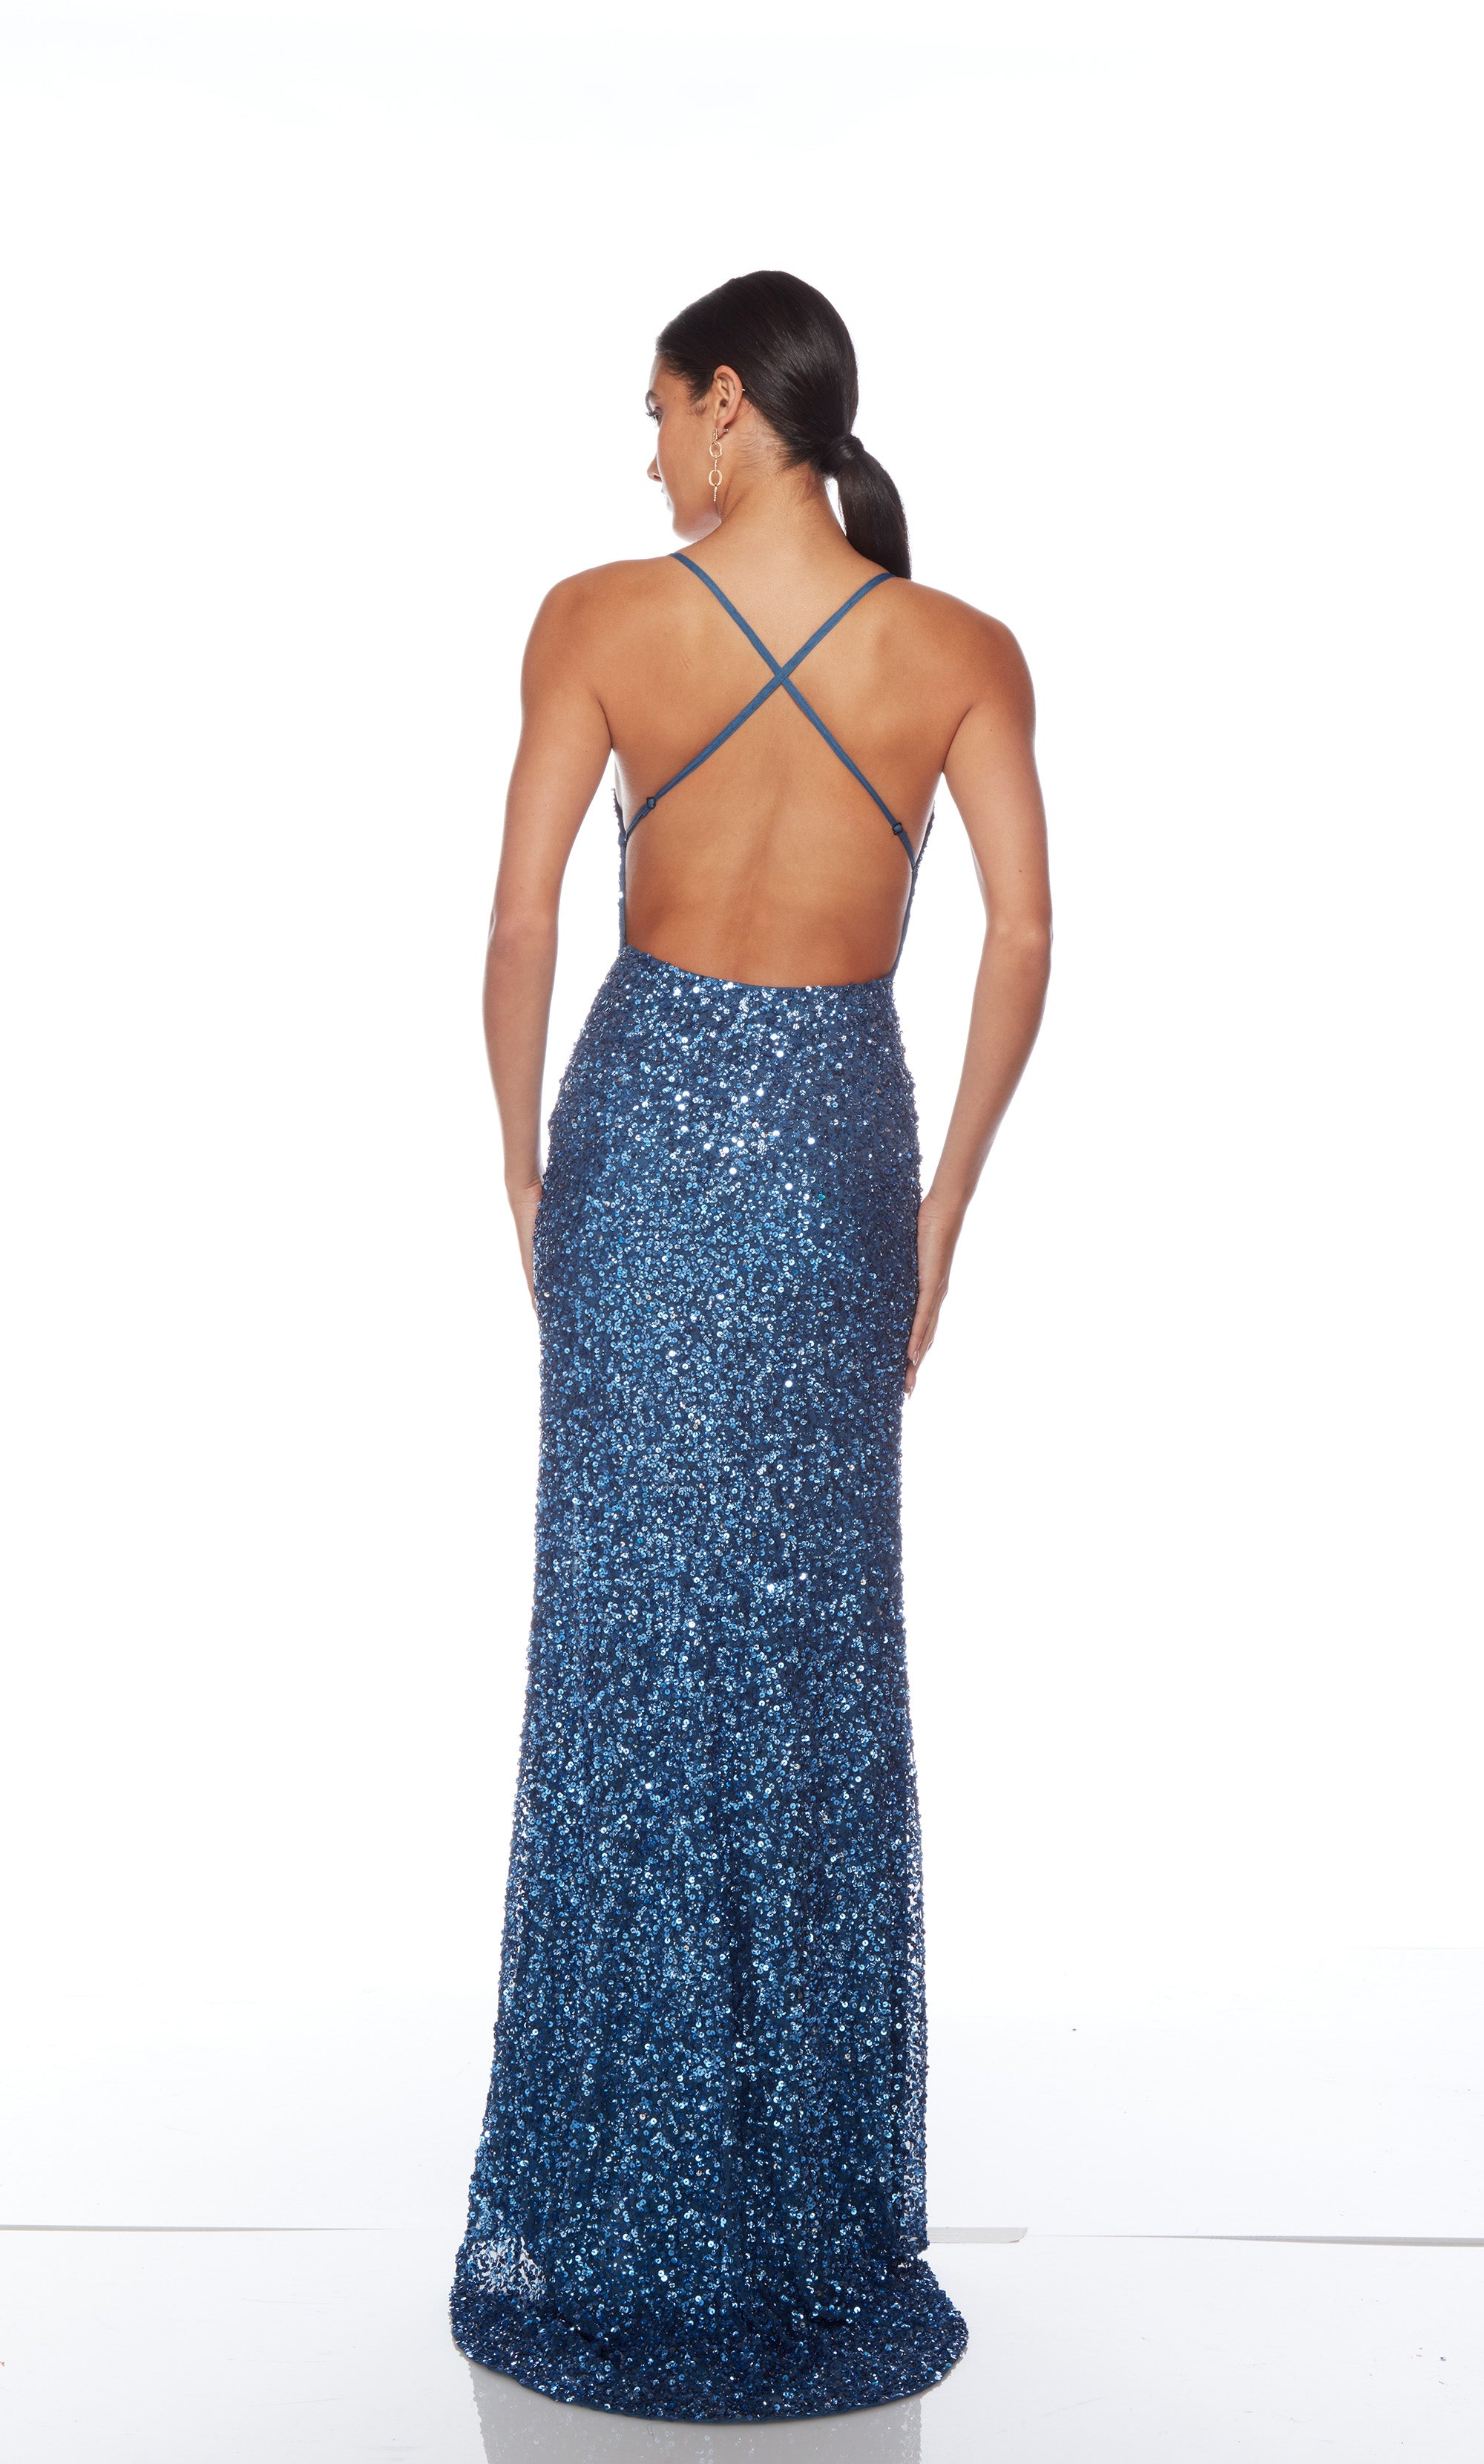 Blue sequin gown with an V neckline, slit, and crisscross adjustable strap back, and an slight train for an elegant and alluring look.